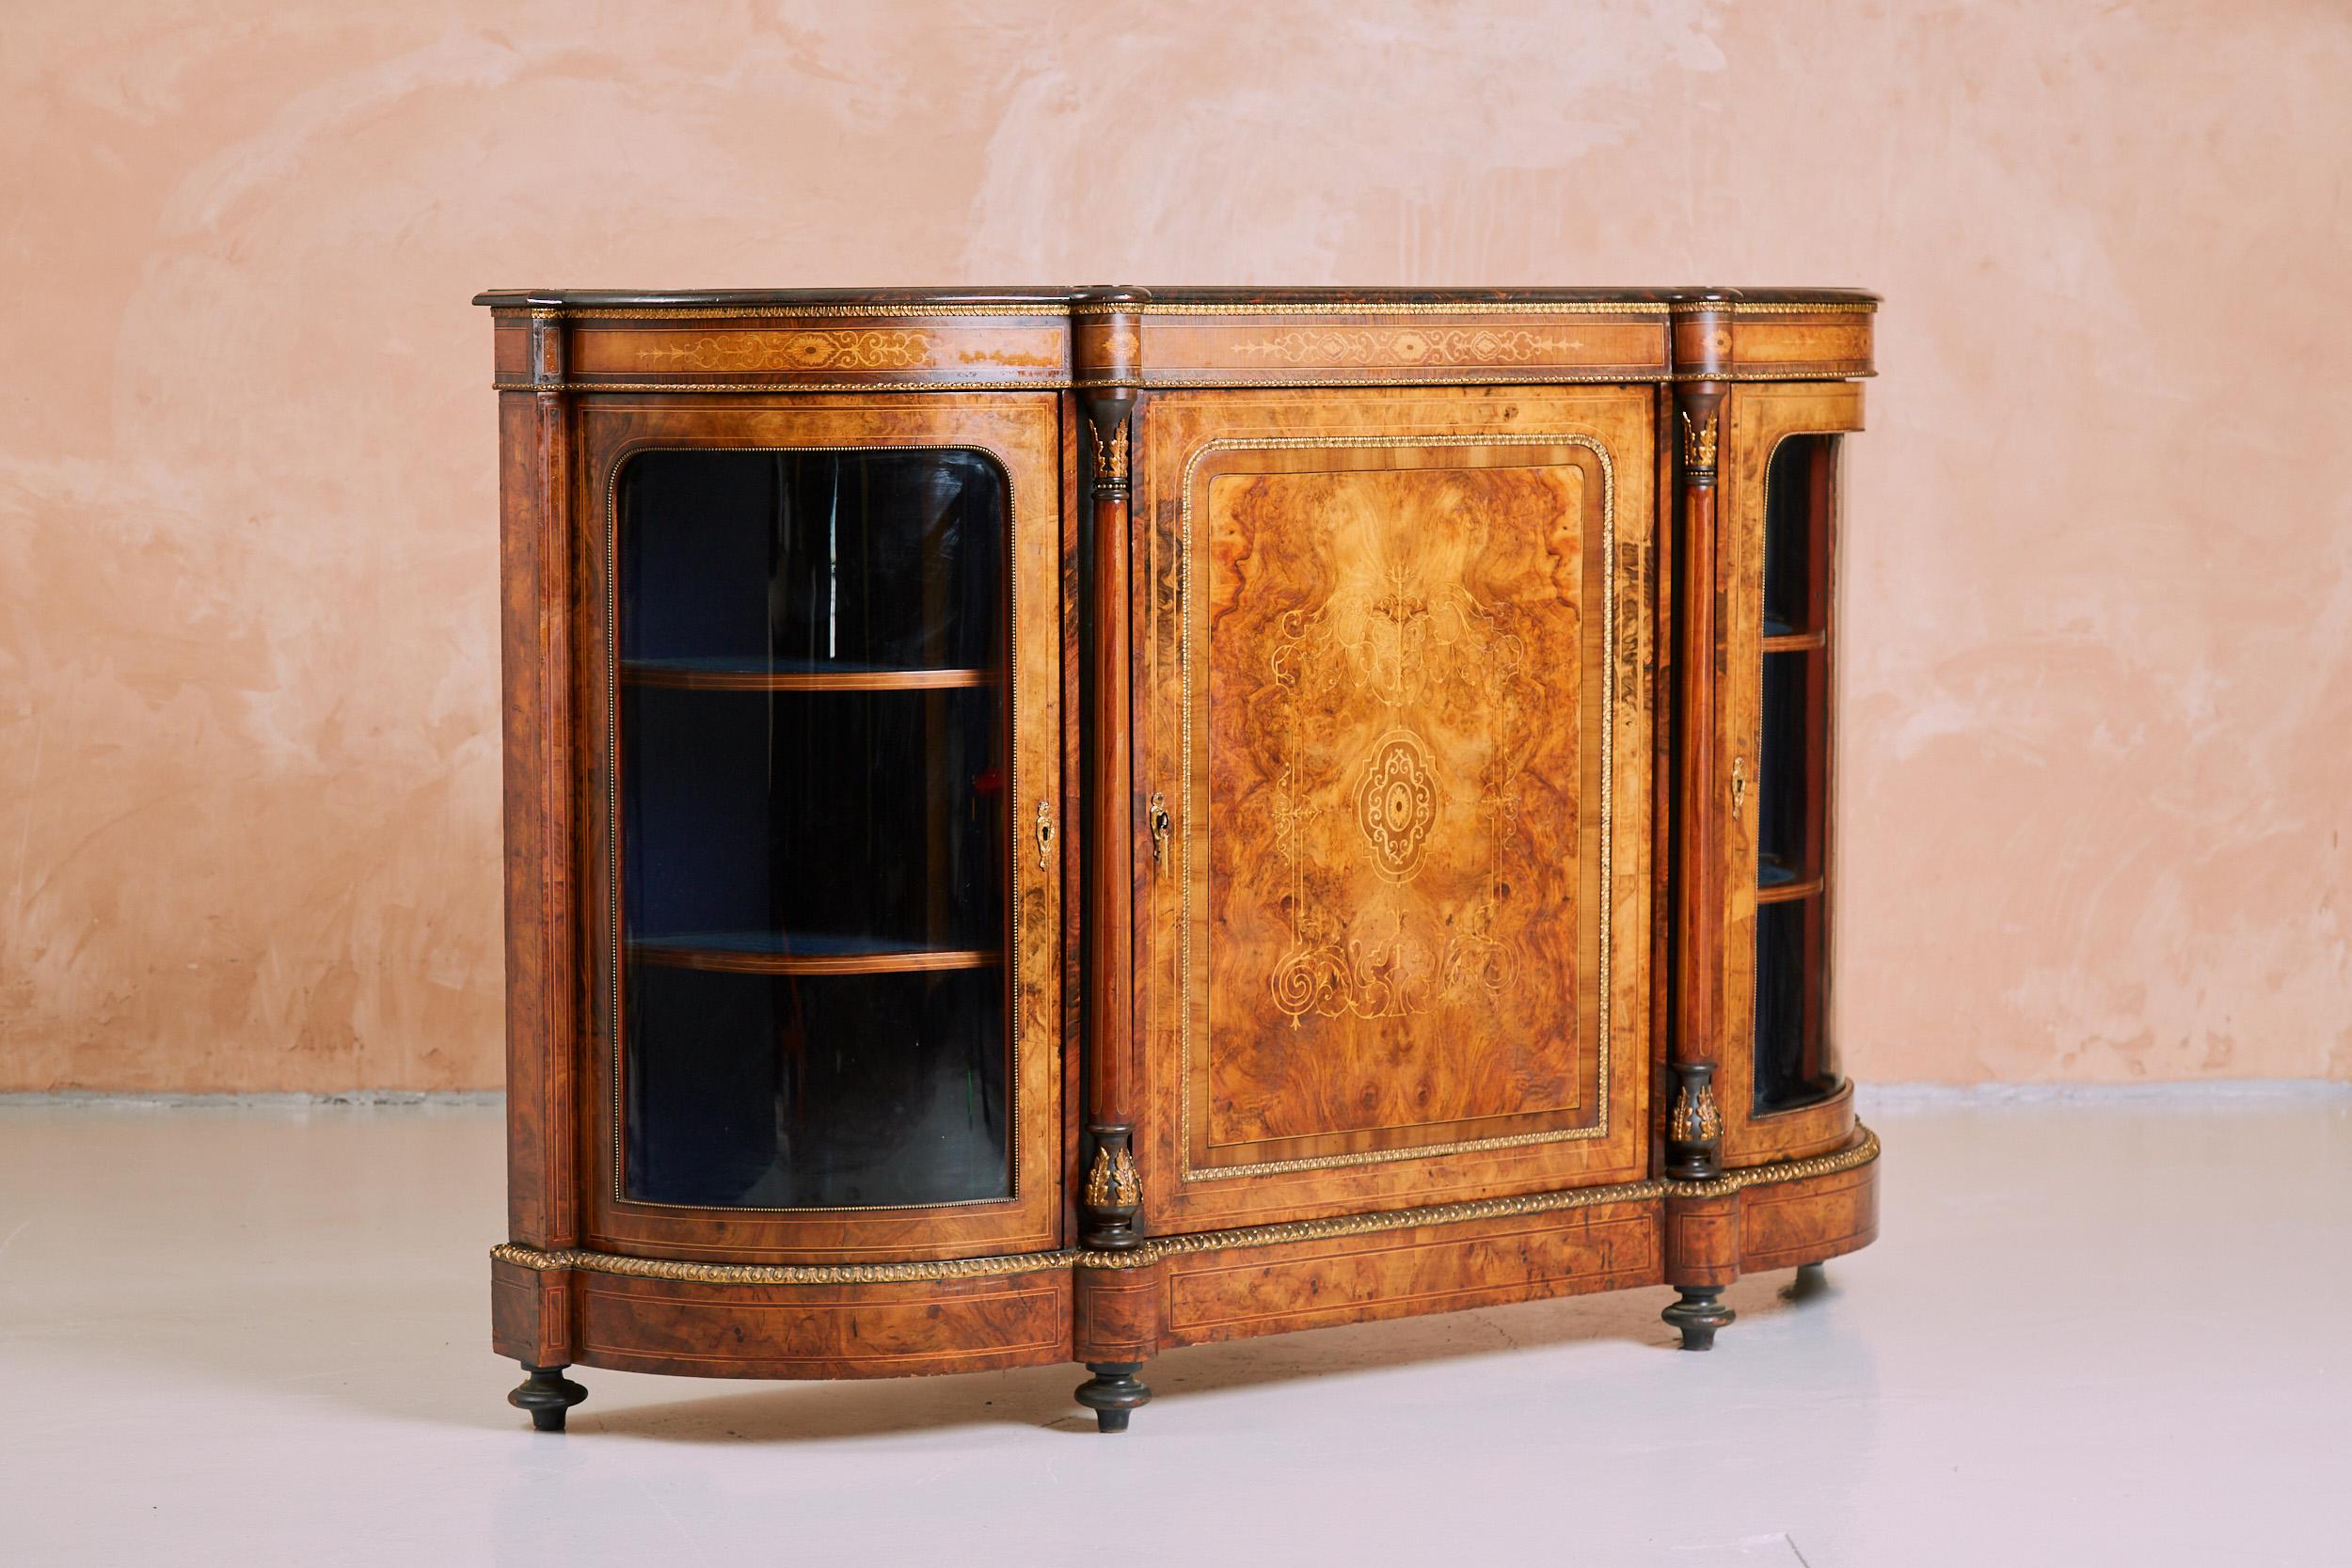 Circa 1860, superb quality large Victorian inlaid burr walnut credenza. 
The shaped top is in figured mirror-matched burr walnut with kingwood and boxwood inlay over an ormolu mounted frieze with inlaid boxwood plaques. 
There is a central door